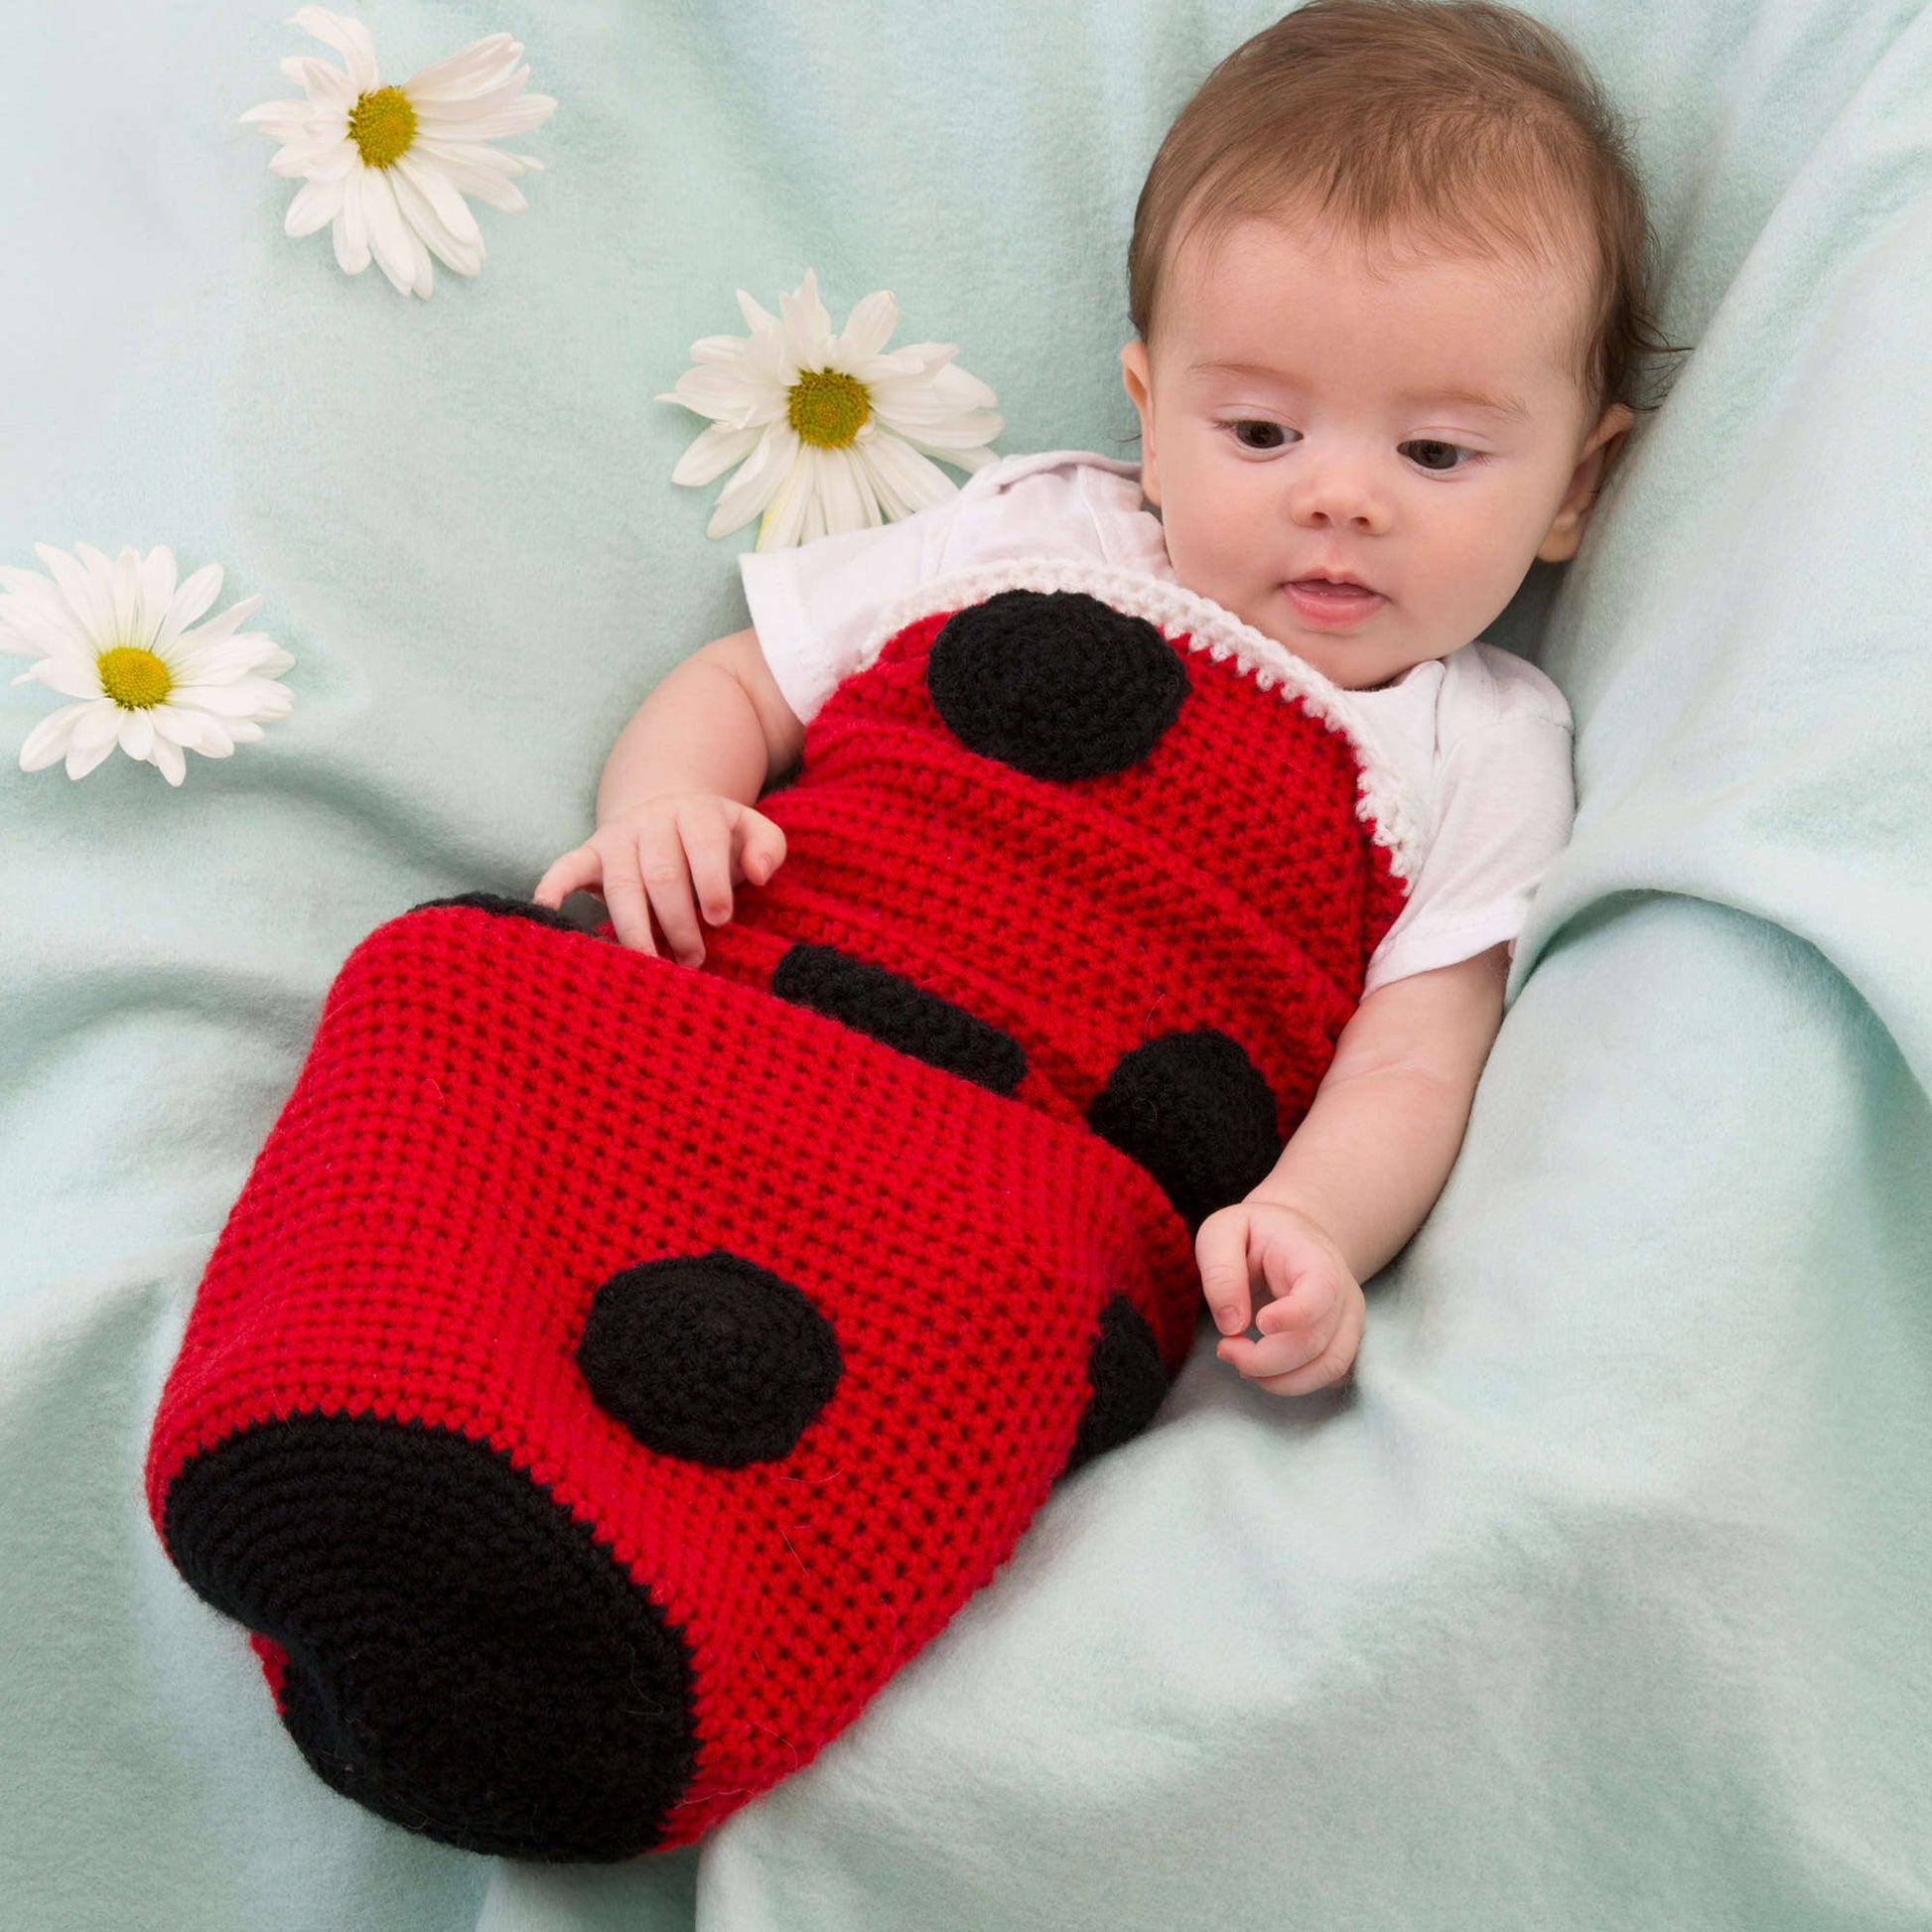 Free Red Heart Crochet Ladybug Baby Cocoon Pattern